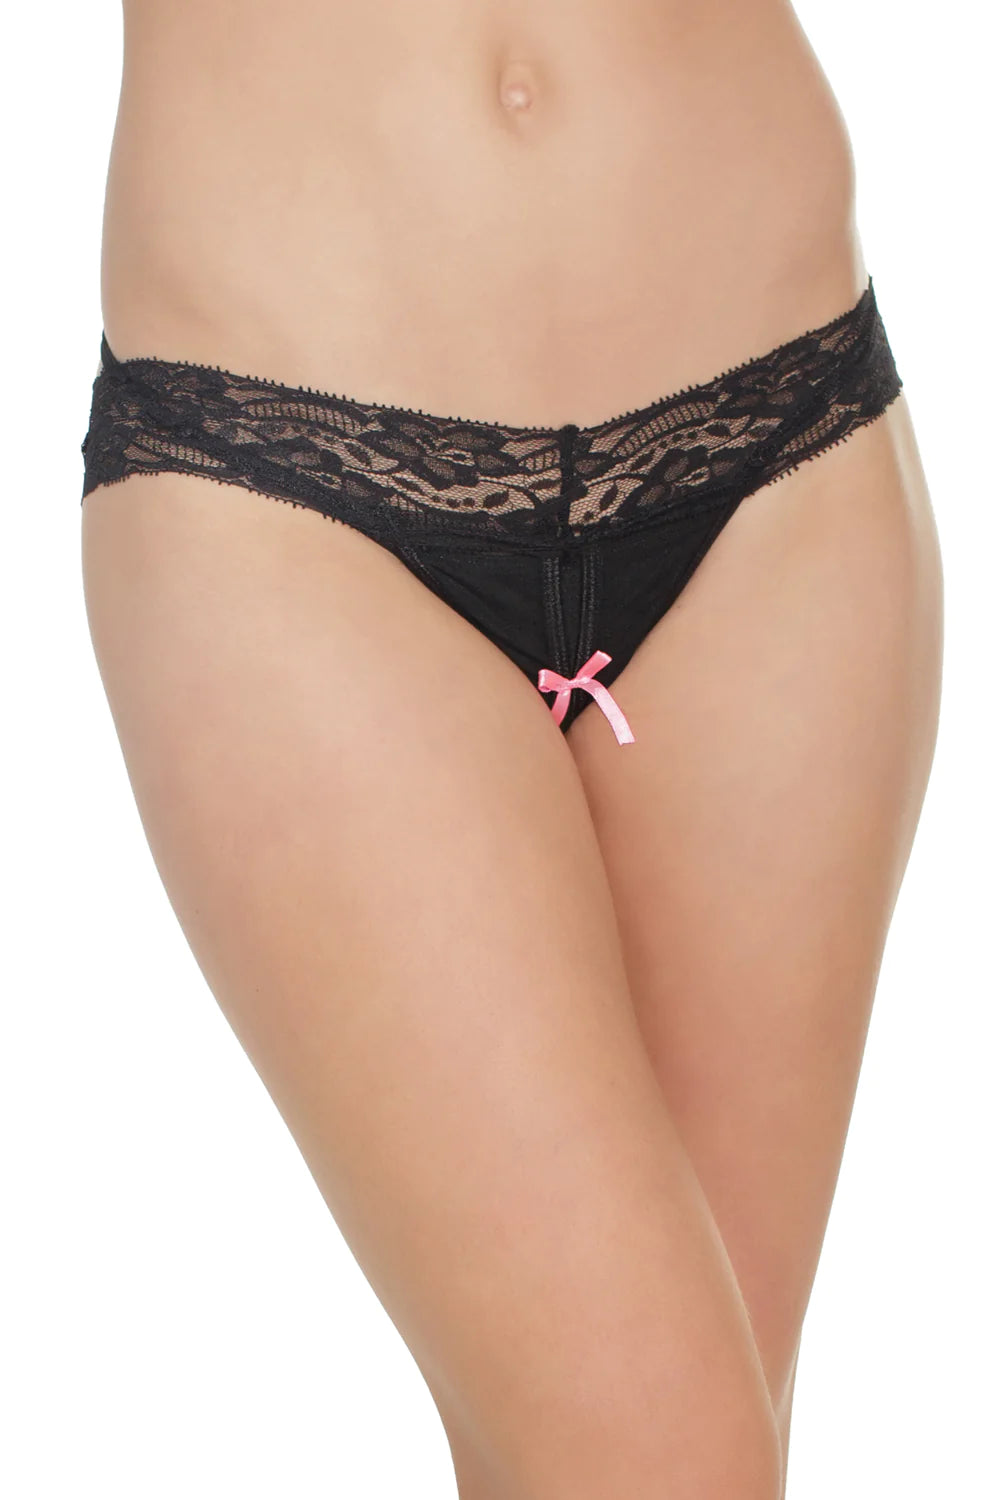 Crotchless Mesh and Lace Thong with Contrasting Pink Ribbon Bow